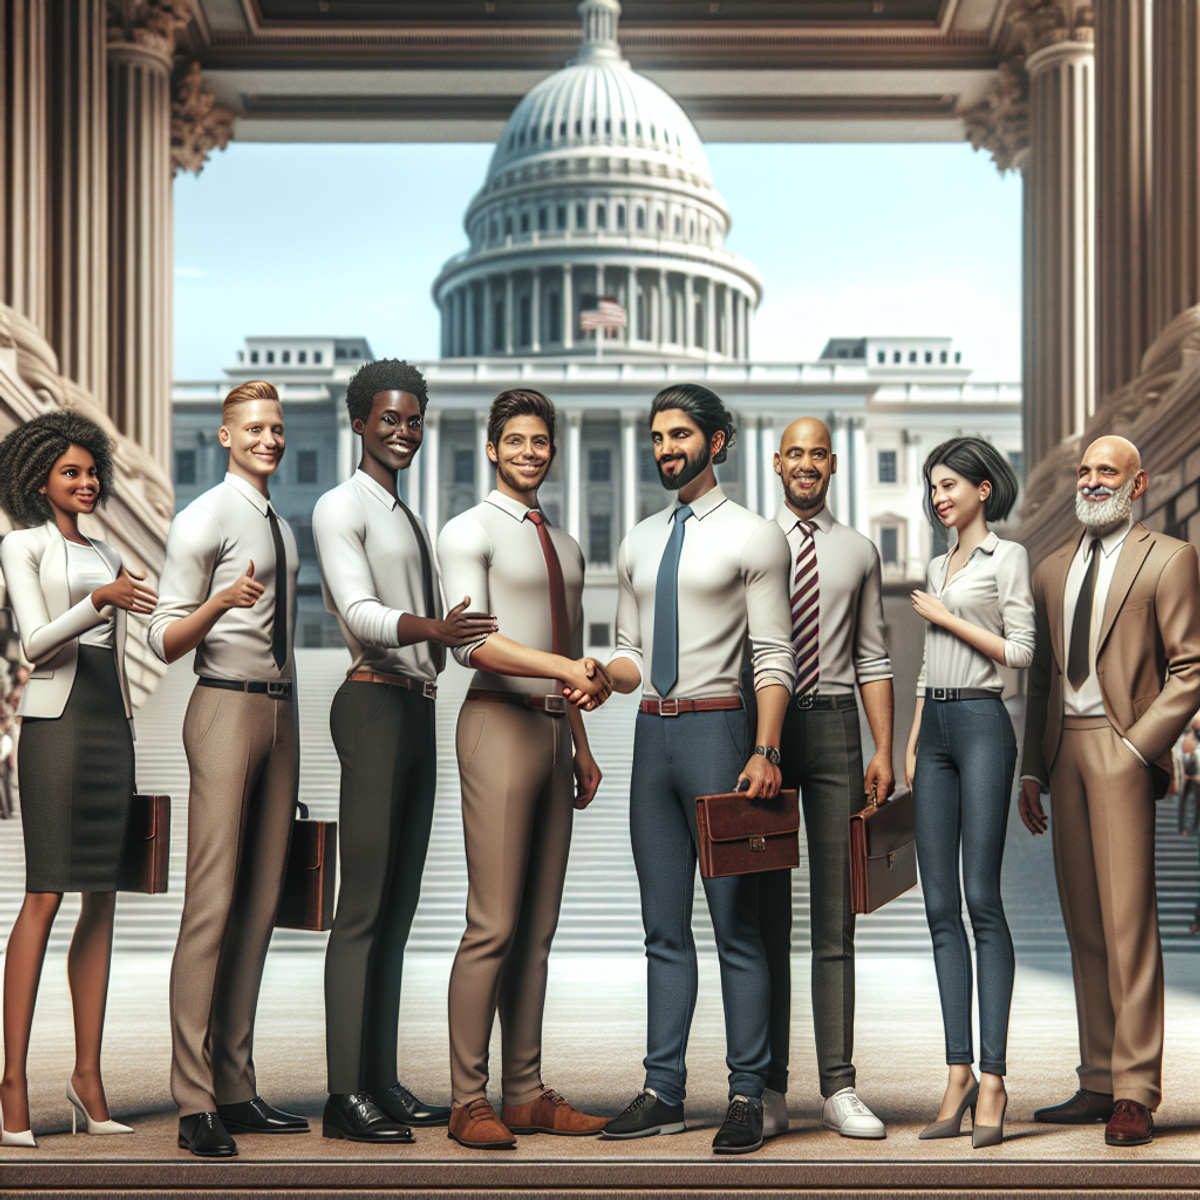 A diverse group of entrepreneurs from various backgrounds shake hands in front of a grand government building.